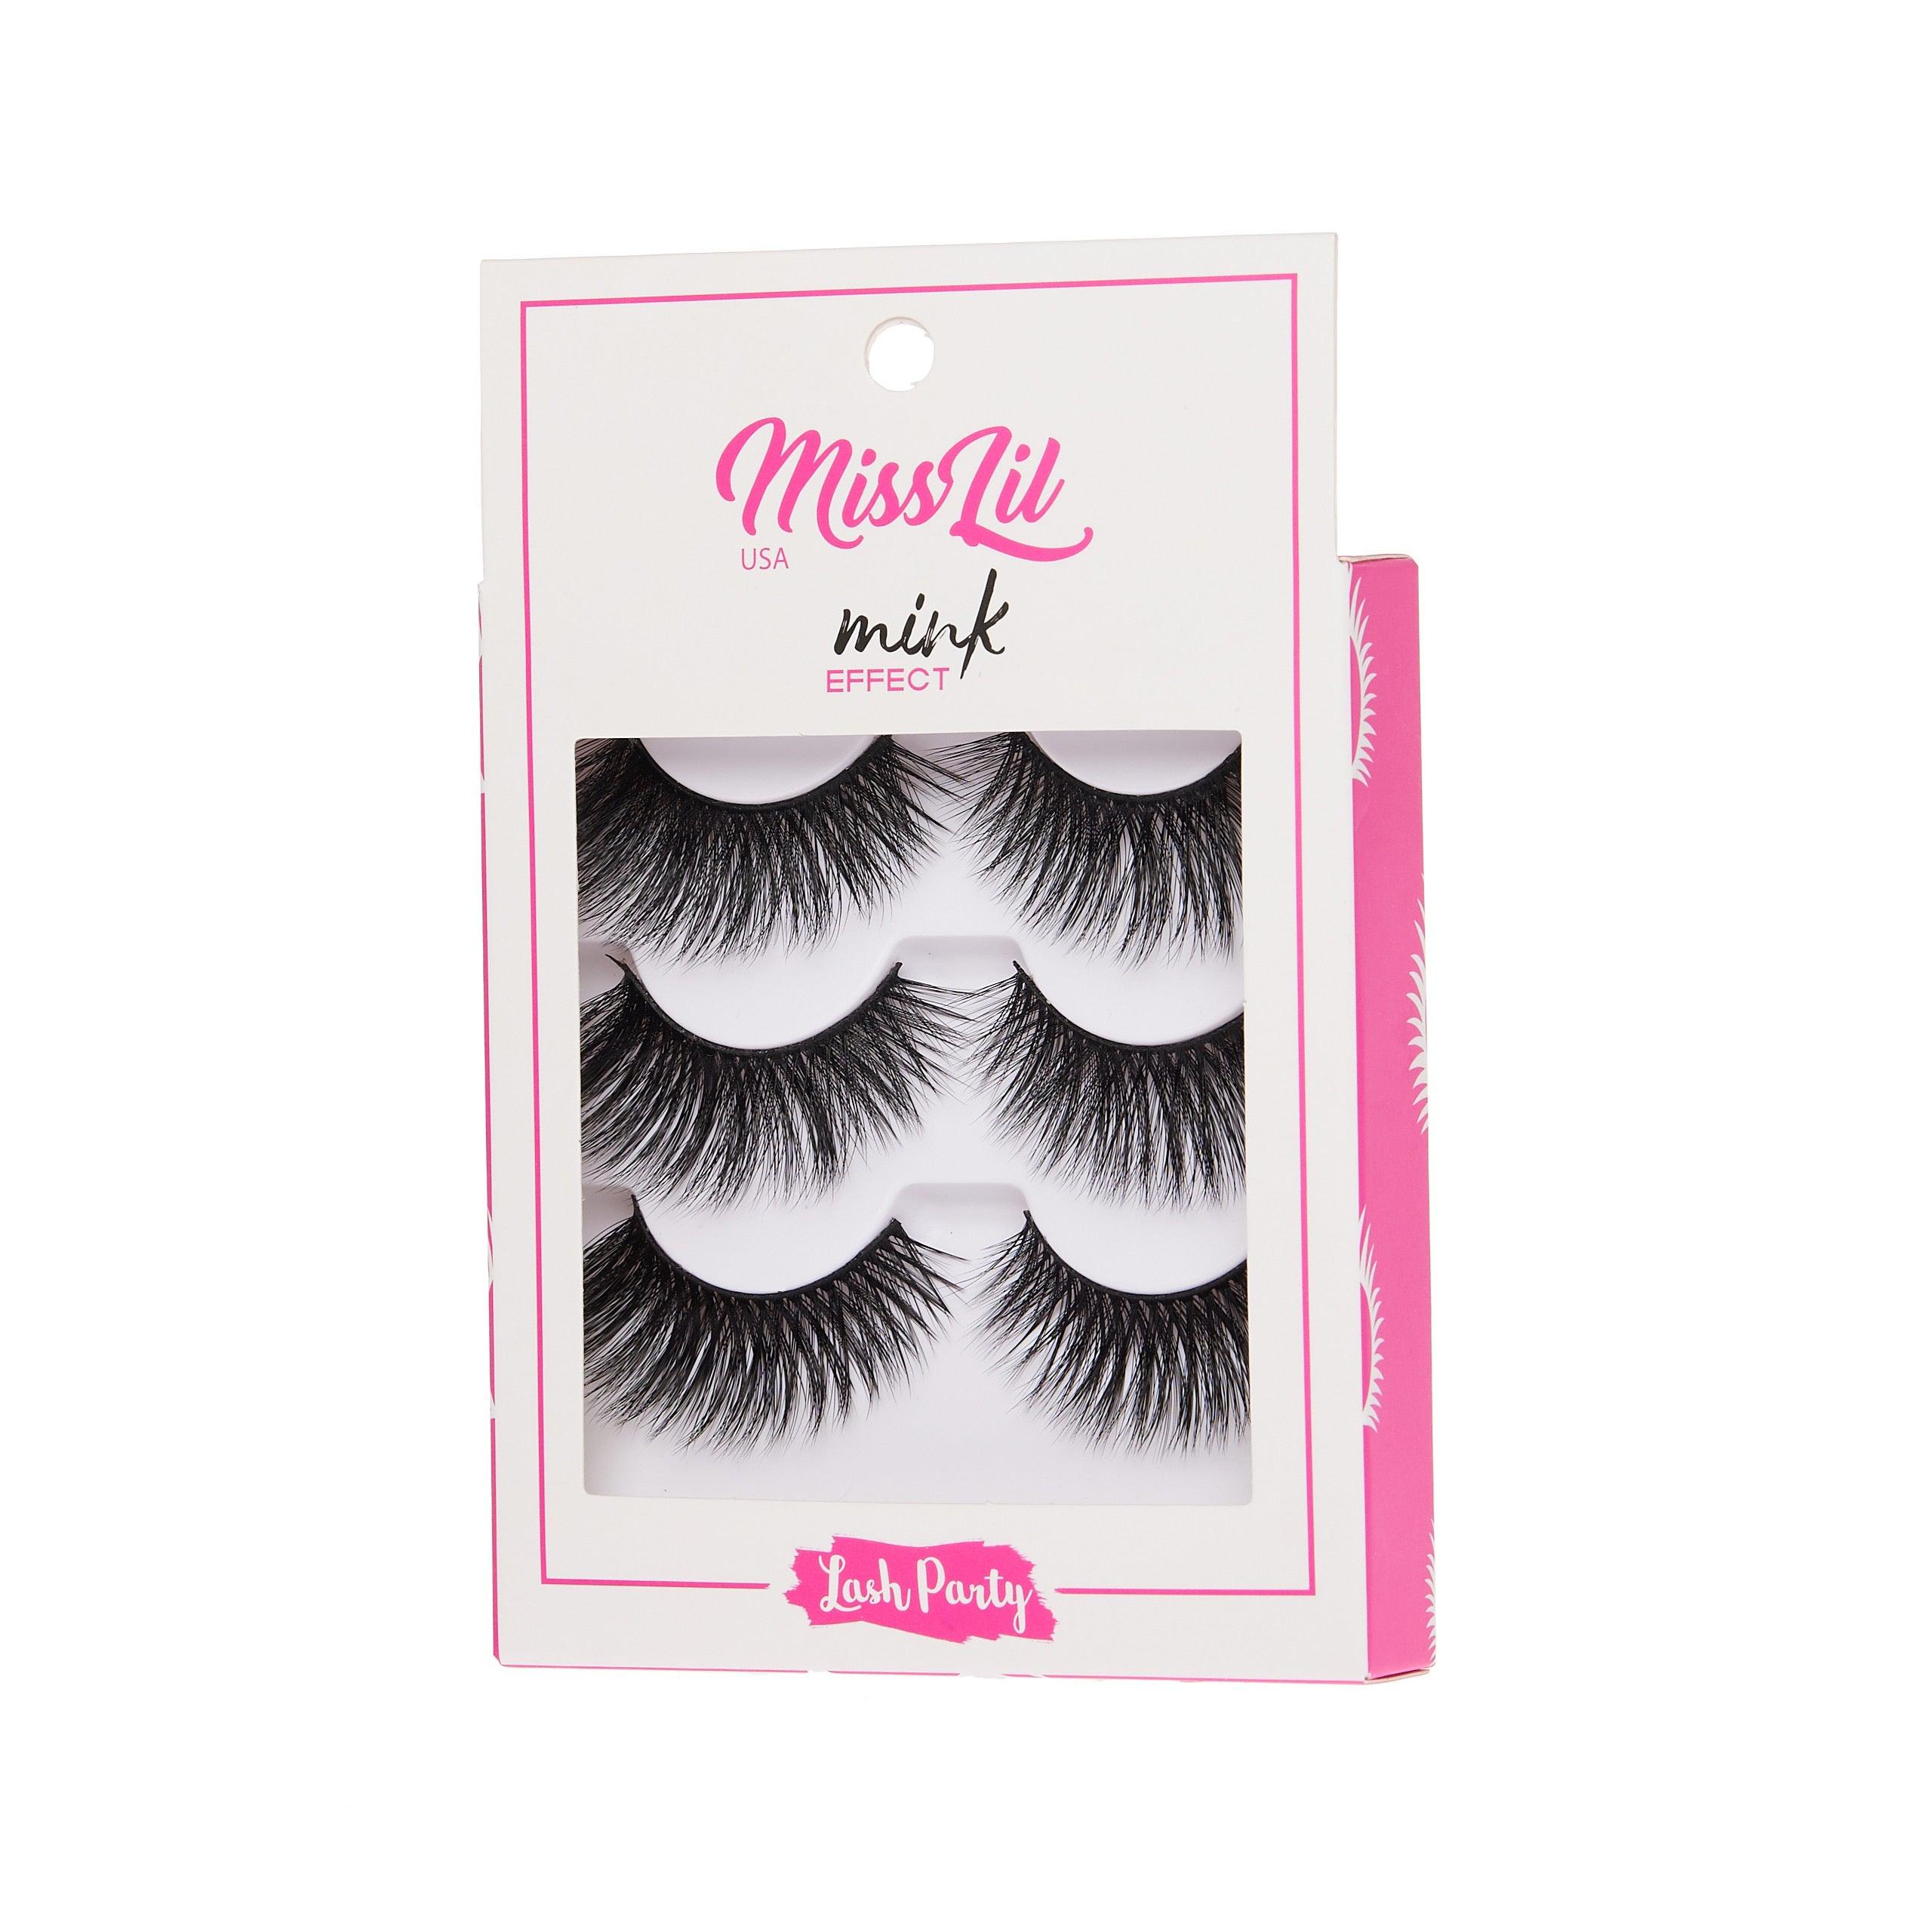 3-Pair Faux Mink Effect Eyelashes - Lash Party Collection #25 - Pack of 3 - Miss Lil USA